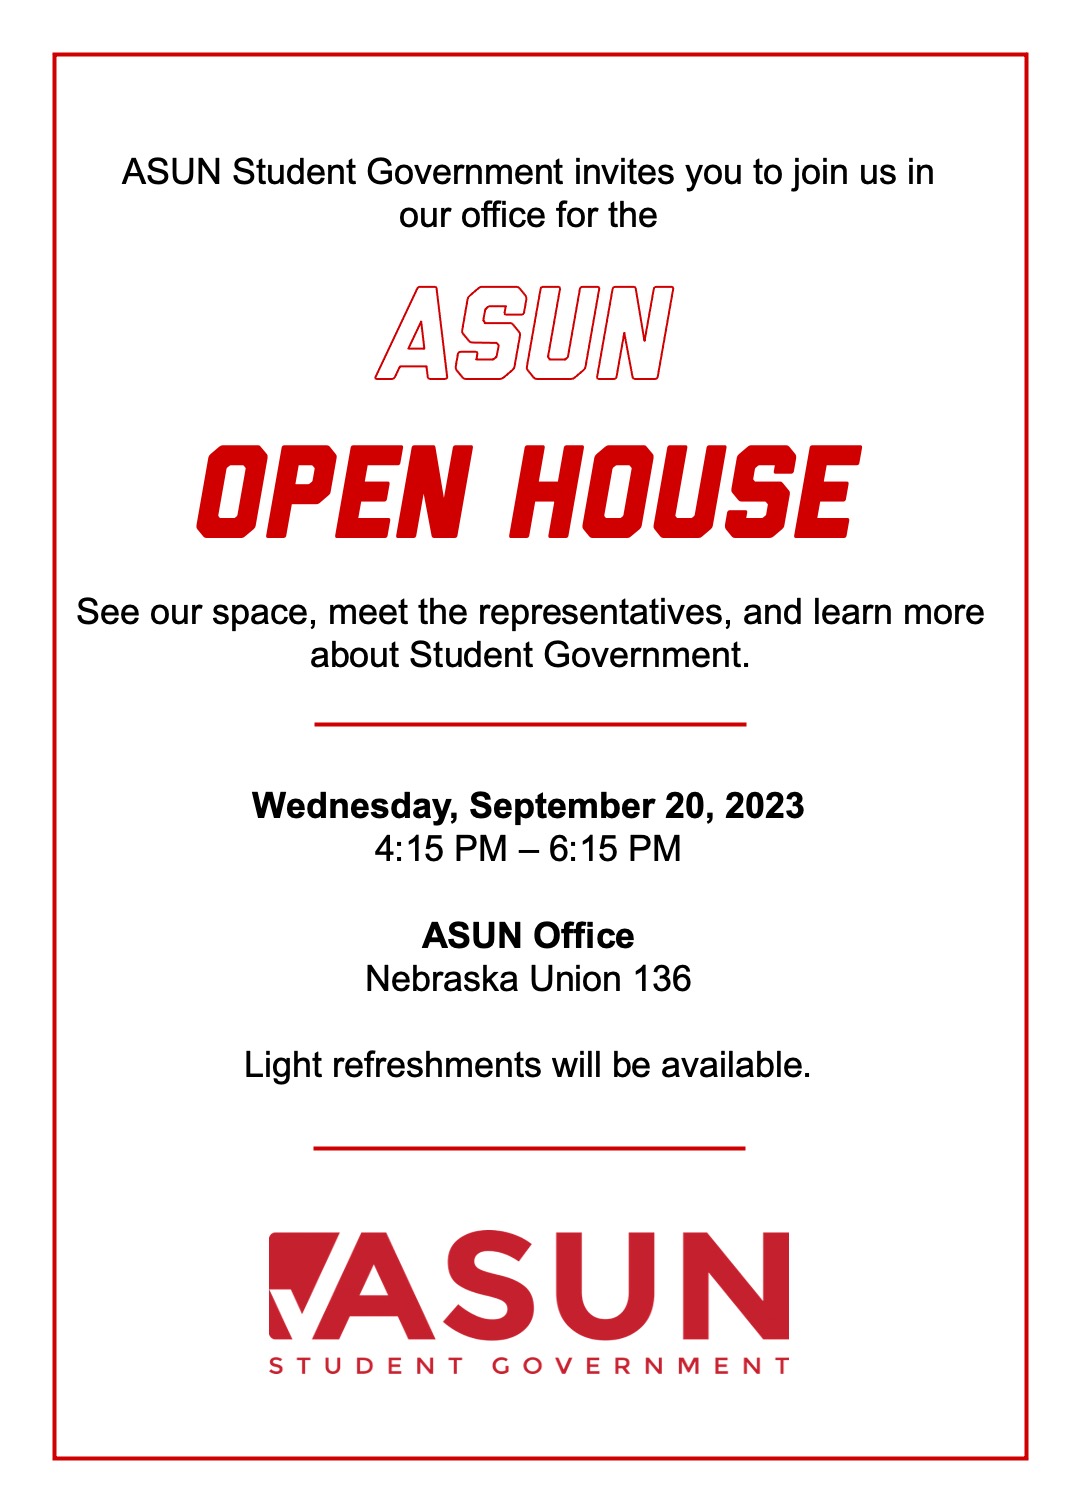 Invitation to ASUN Open House on September 20, 2023 at 4:15 PM.